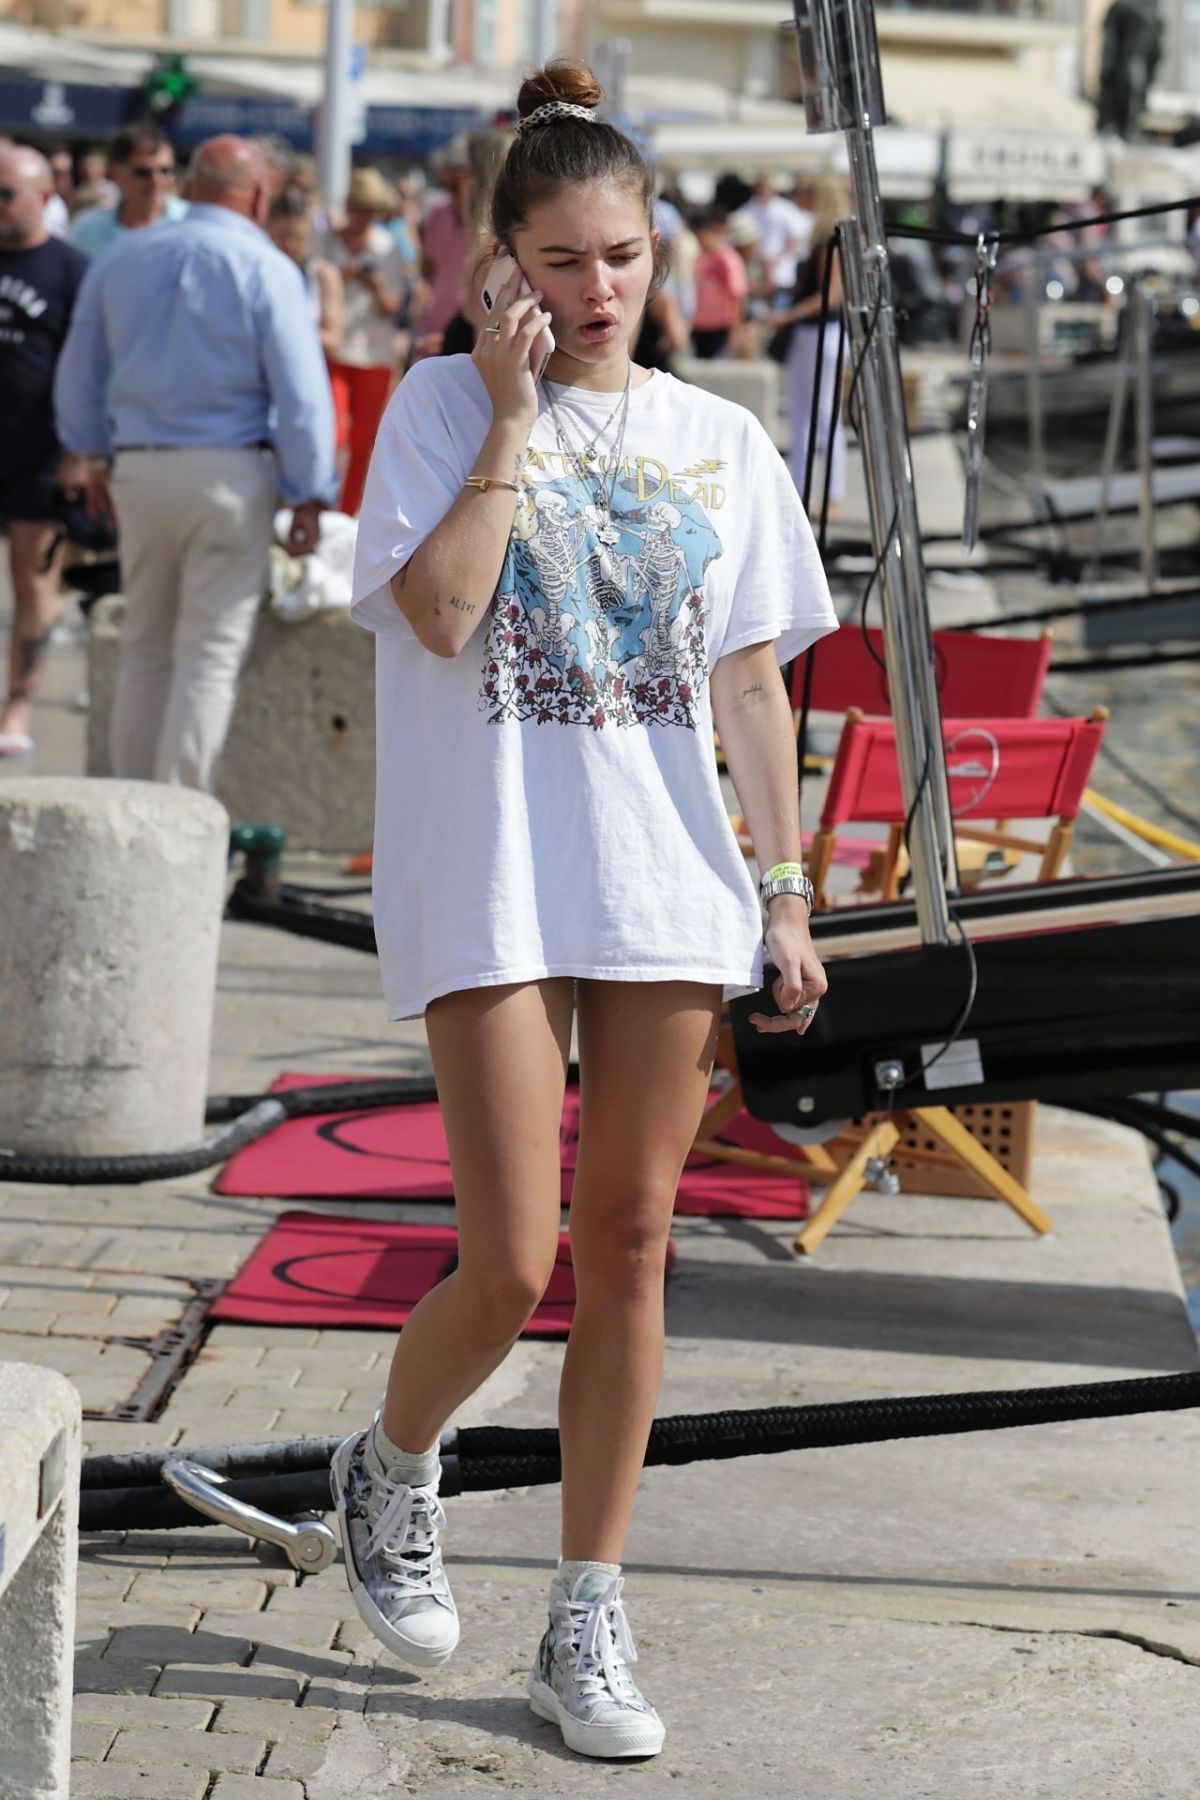 THYLANE BLONDEAU Out and About shorts in Saint Tropez 07/15/2019 ...